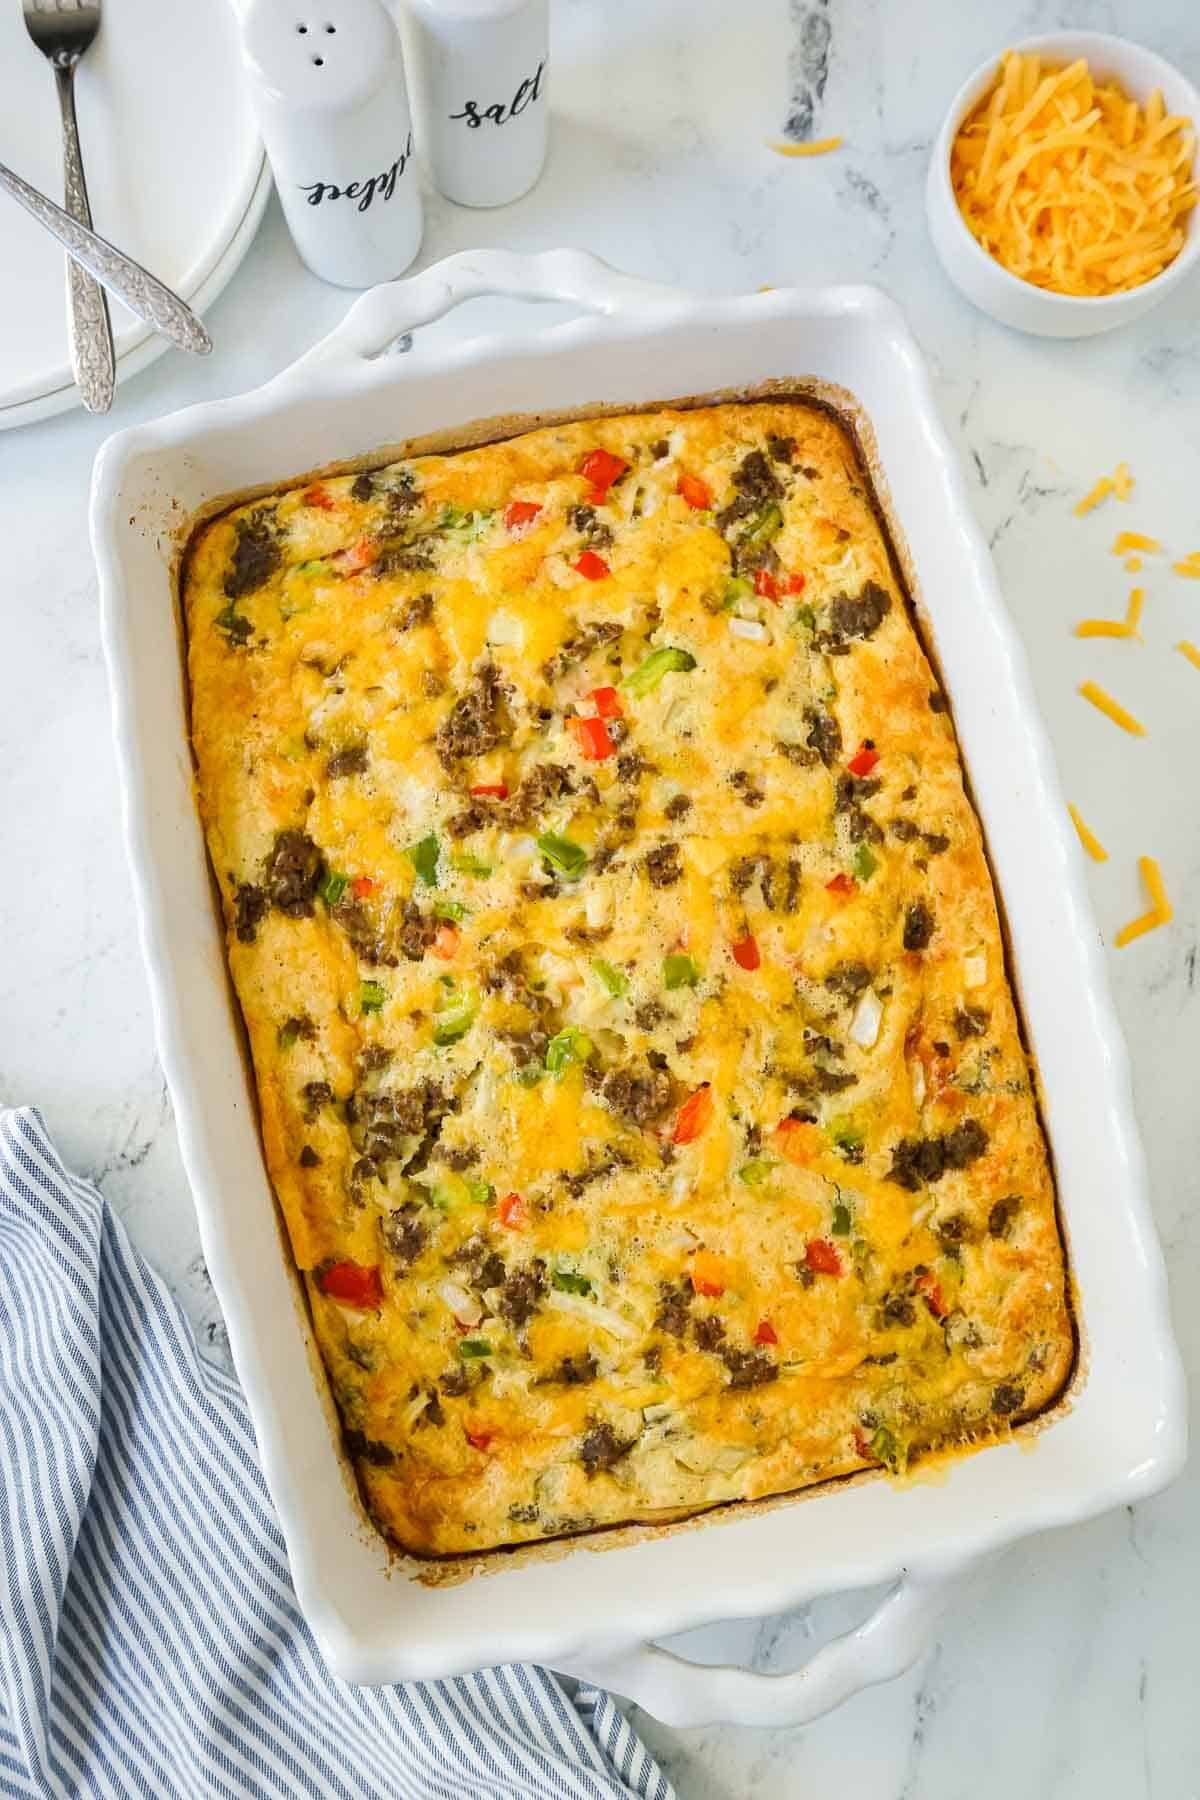 Bisquick Breakfast Casserole with Sausage in a white baking dish.